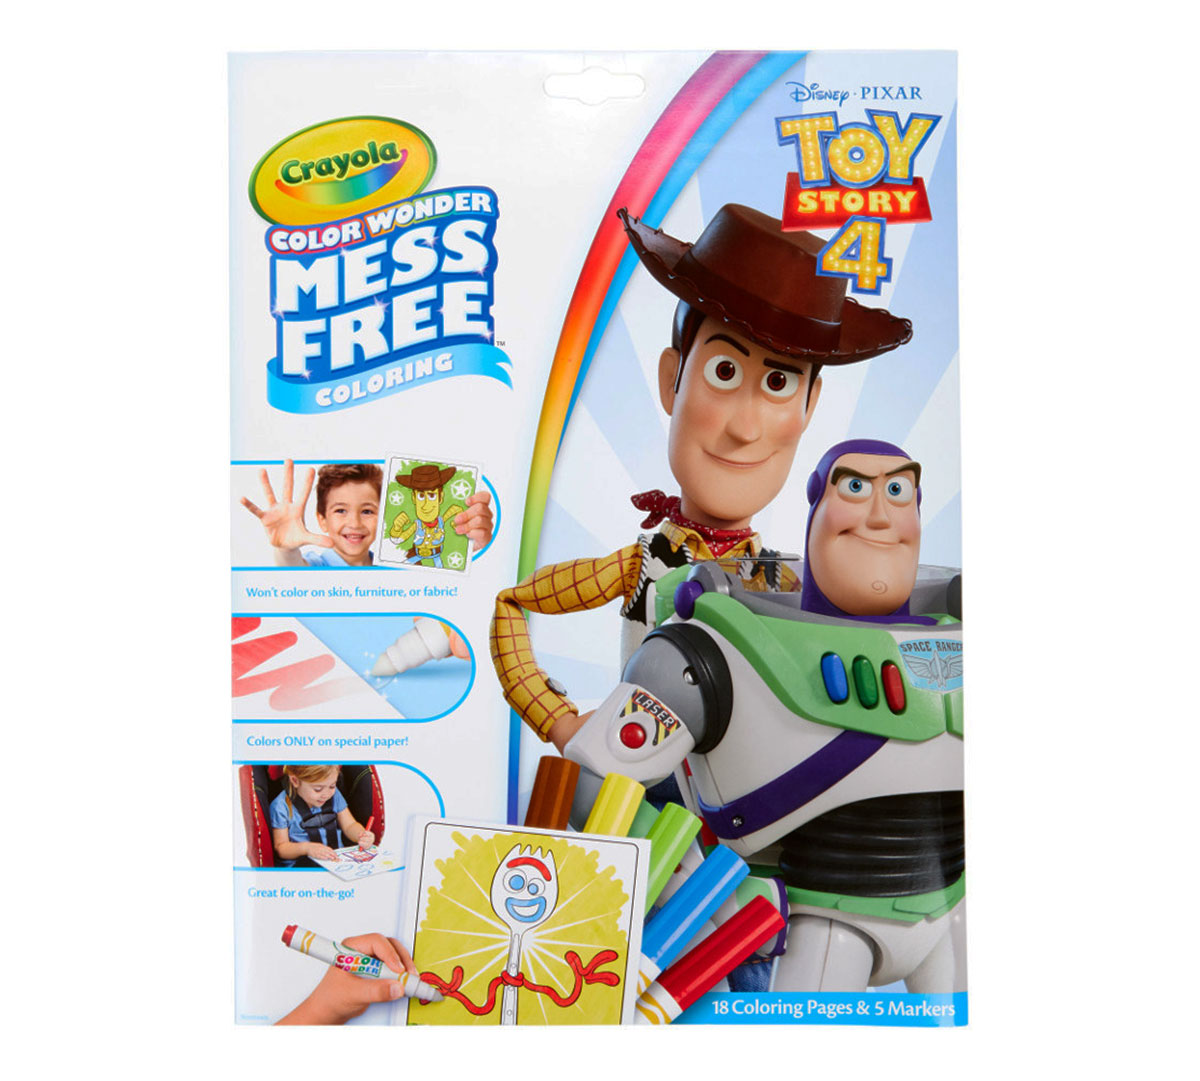 Toy Story 4 Color Wonder Coloring Book 